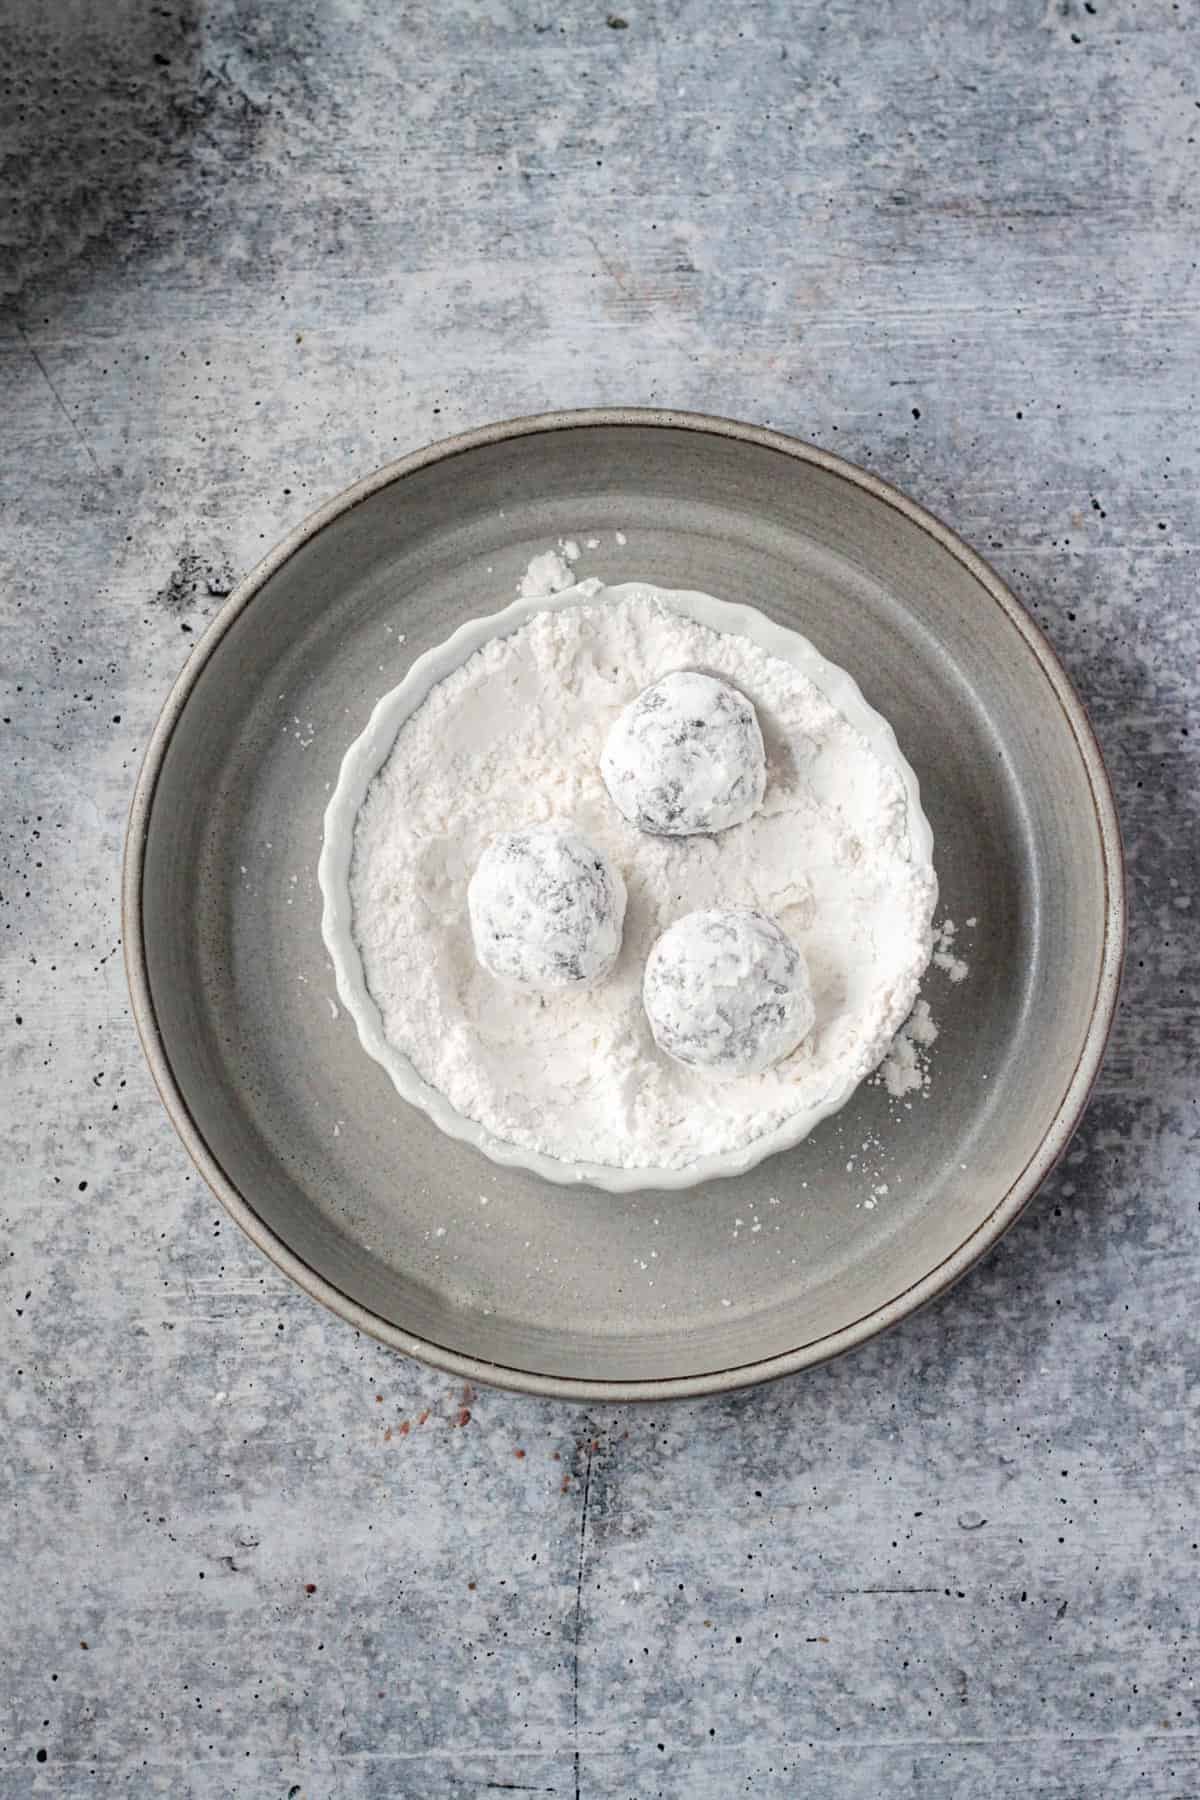 Three dough balls completely coated in powdered sugar.